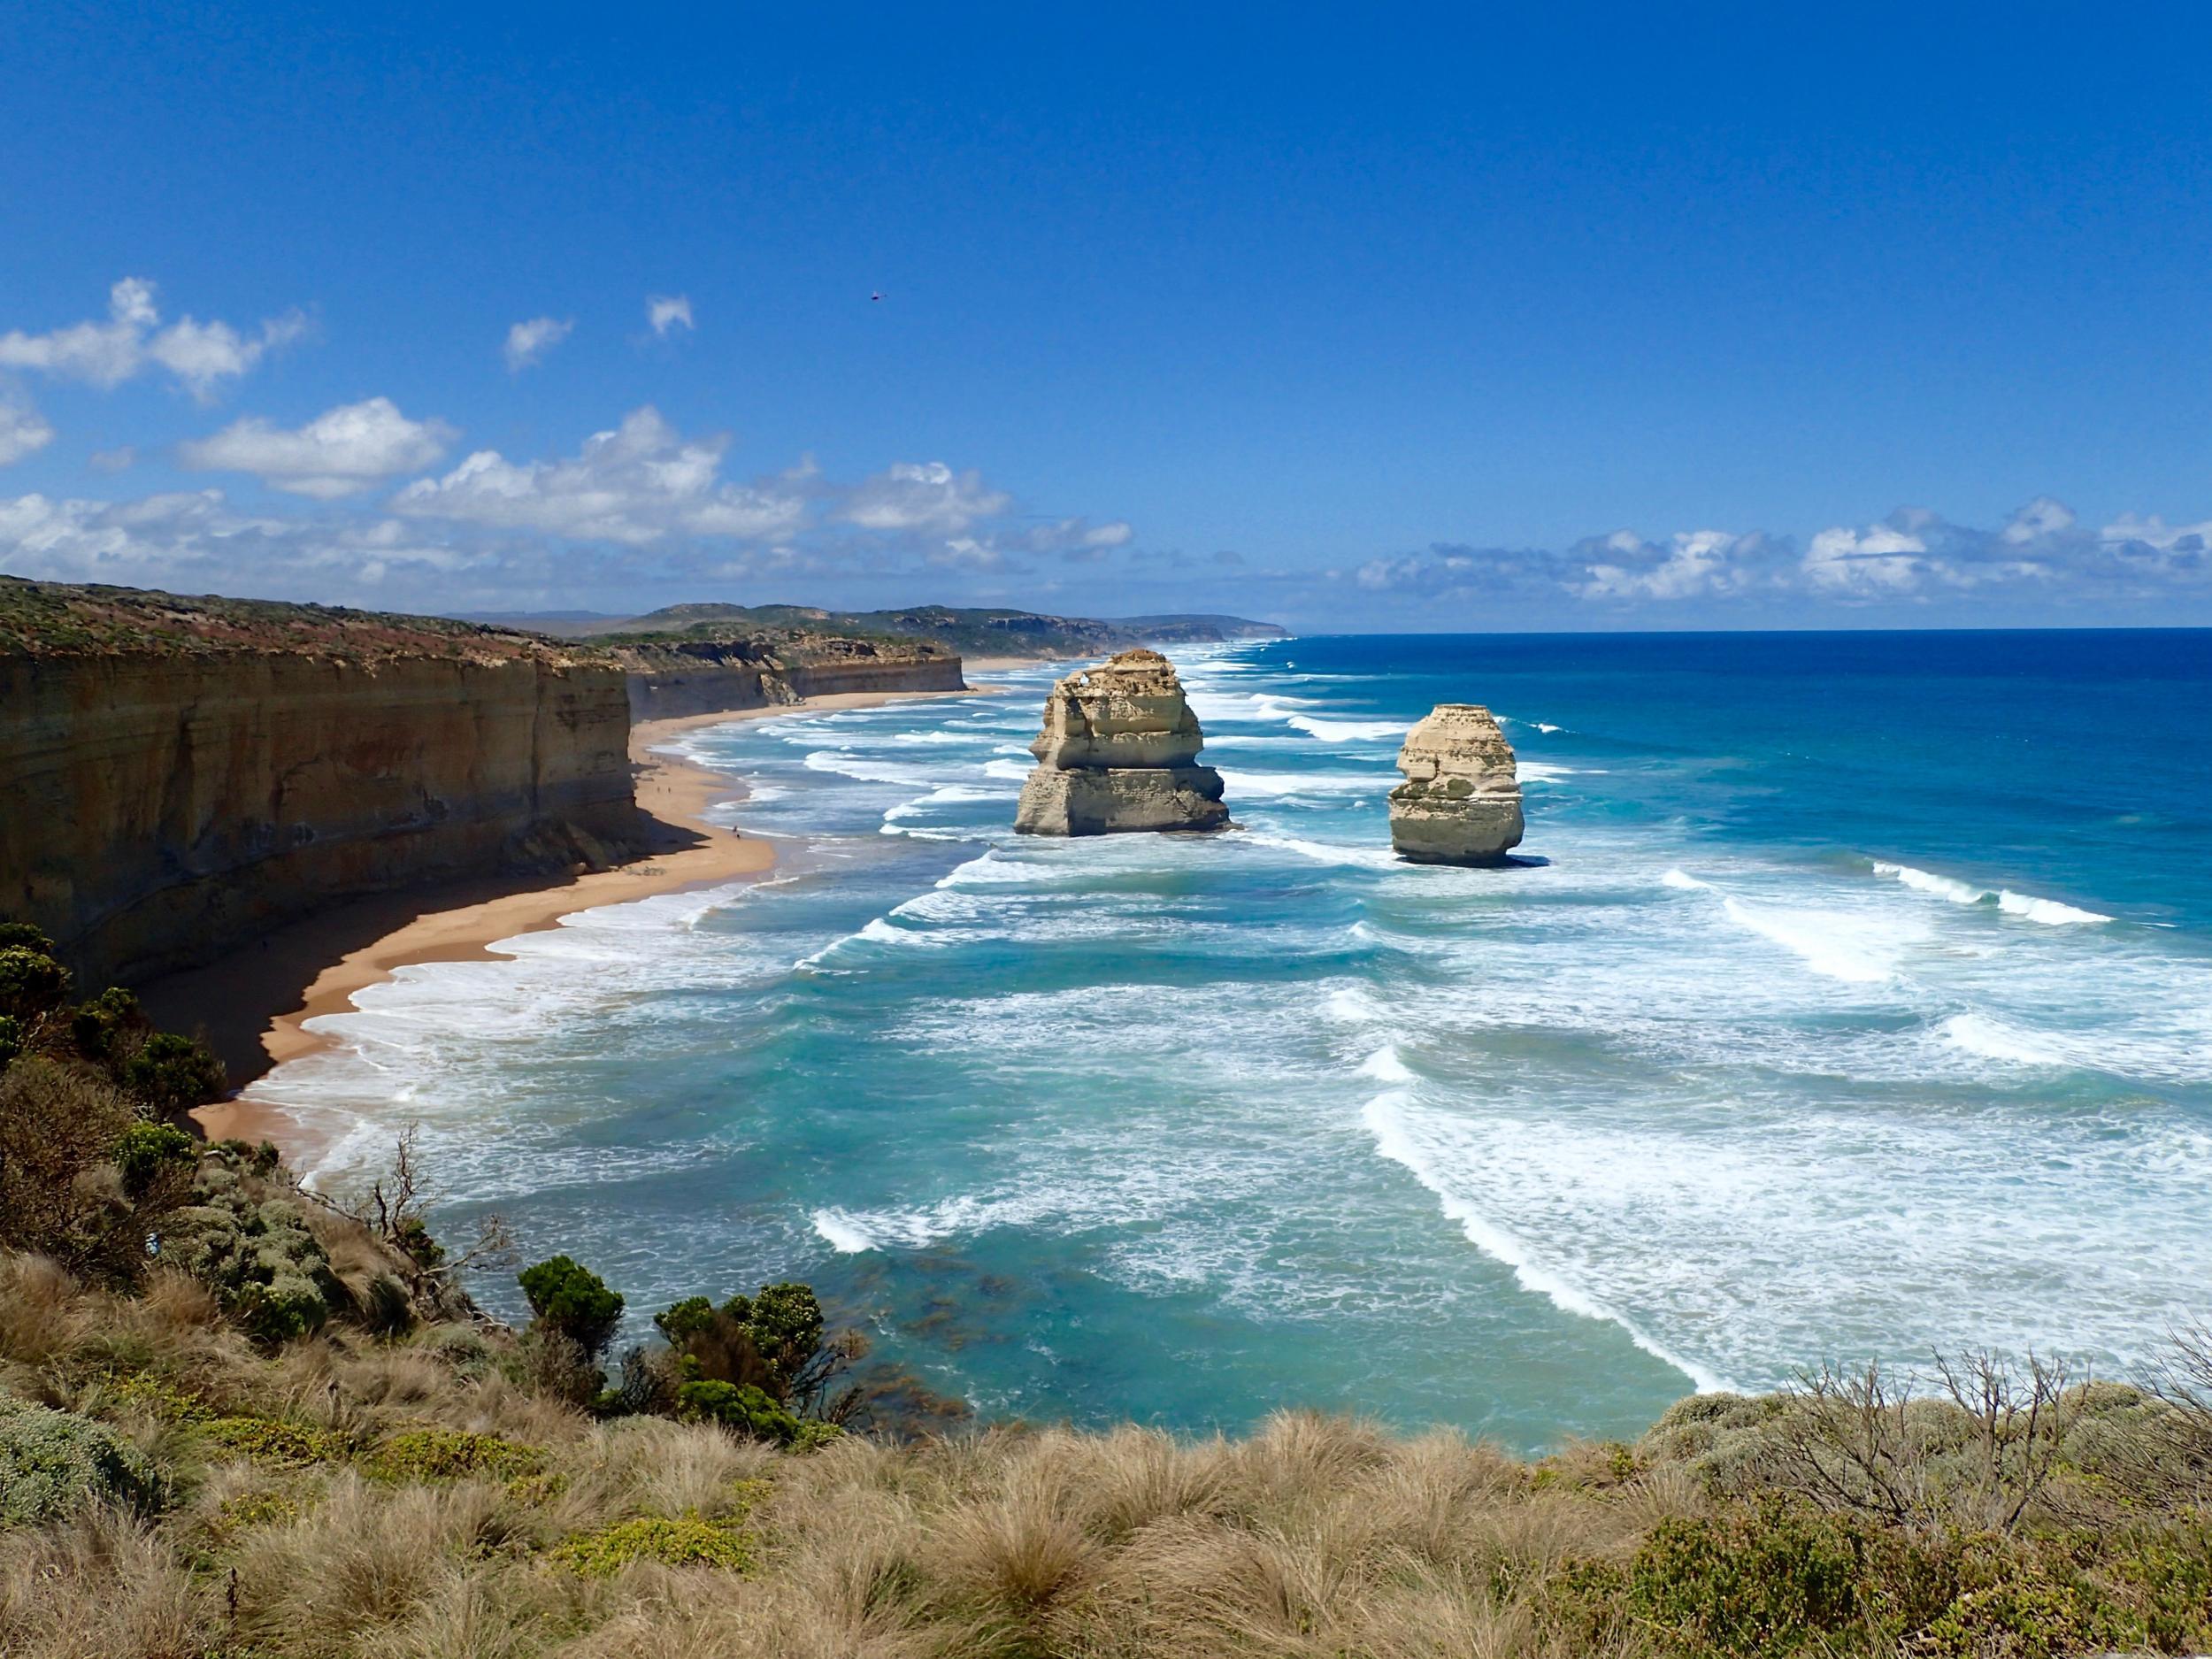 Australia's Great Ocean Road passes cool surf hangouts and provides plenty of opportunity to taste fresh seafood